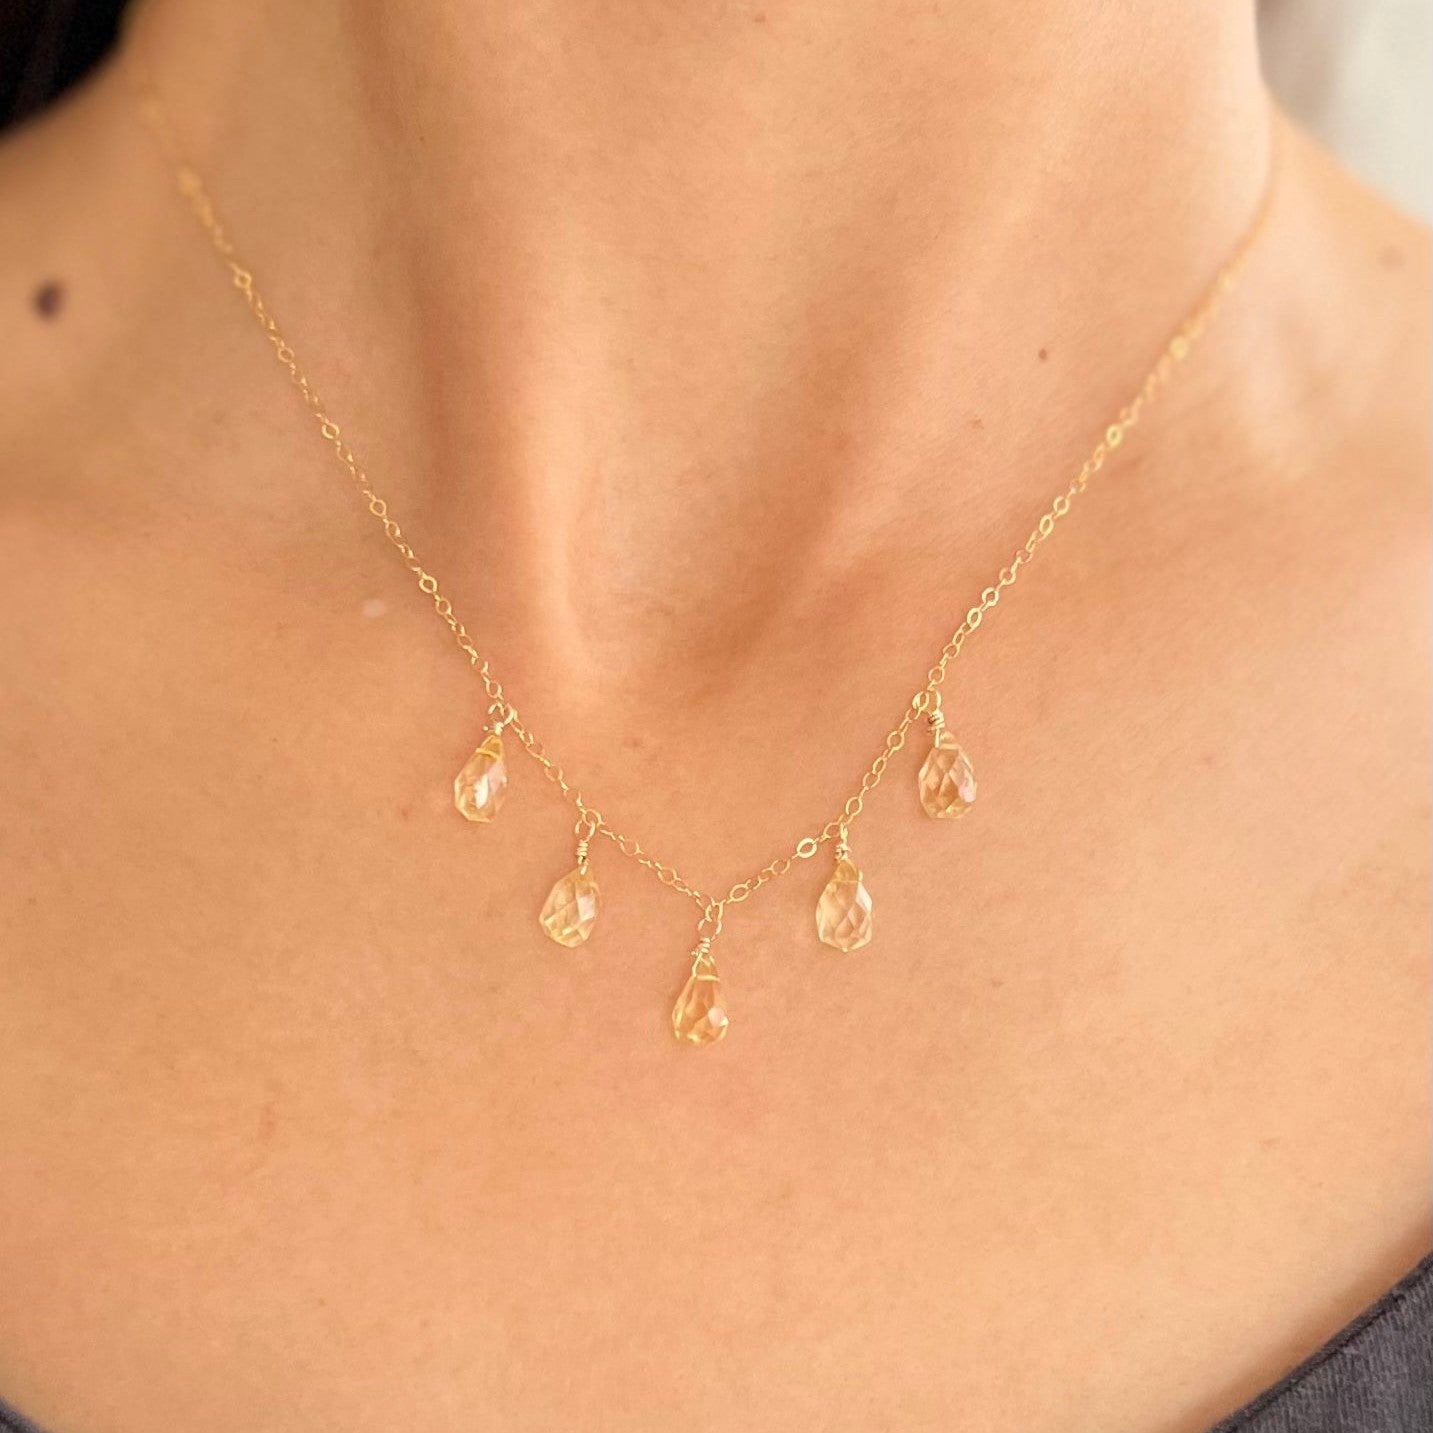 Citrine gold necklace